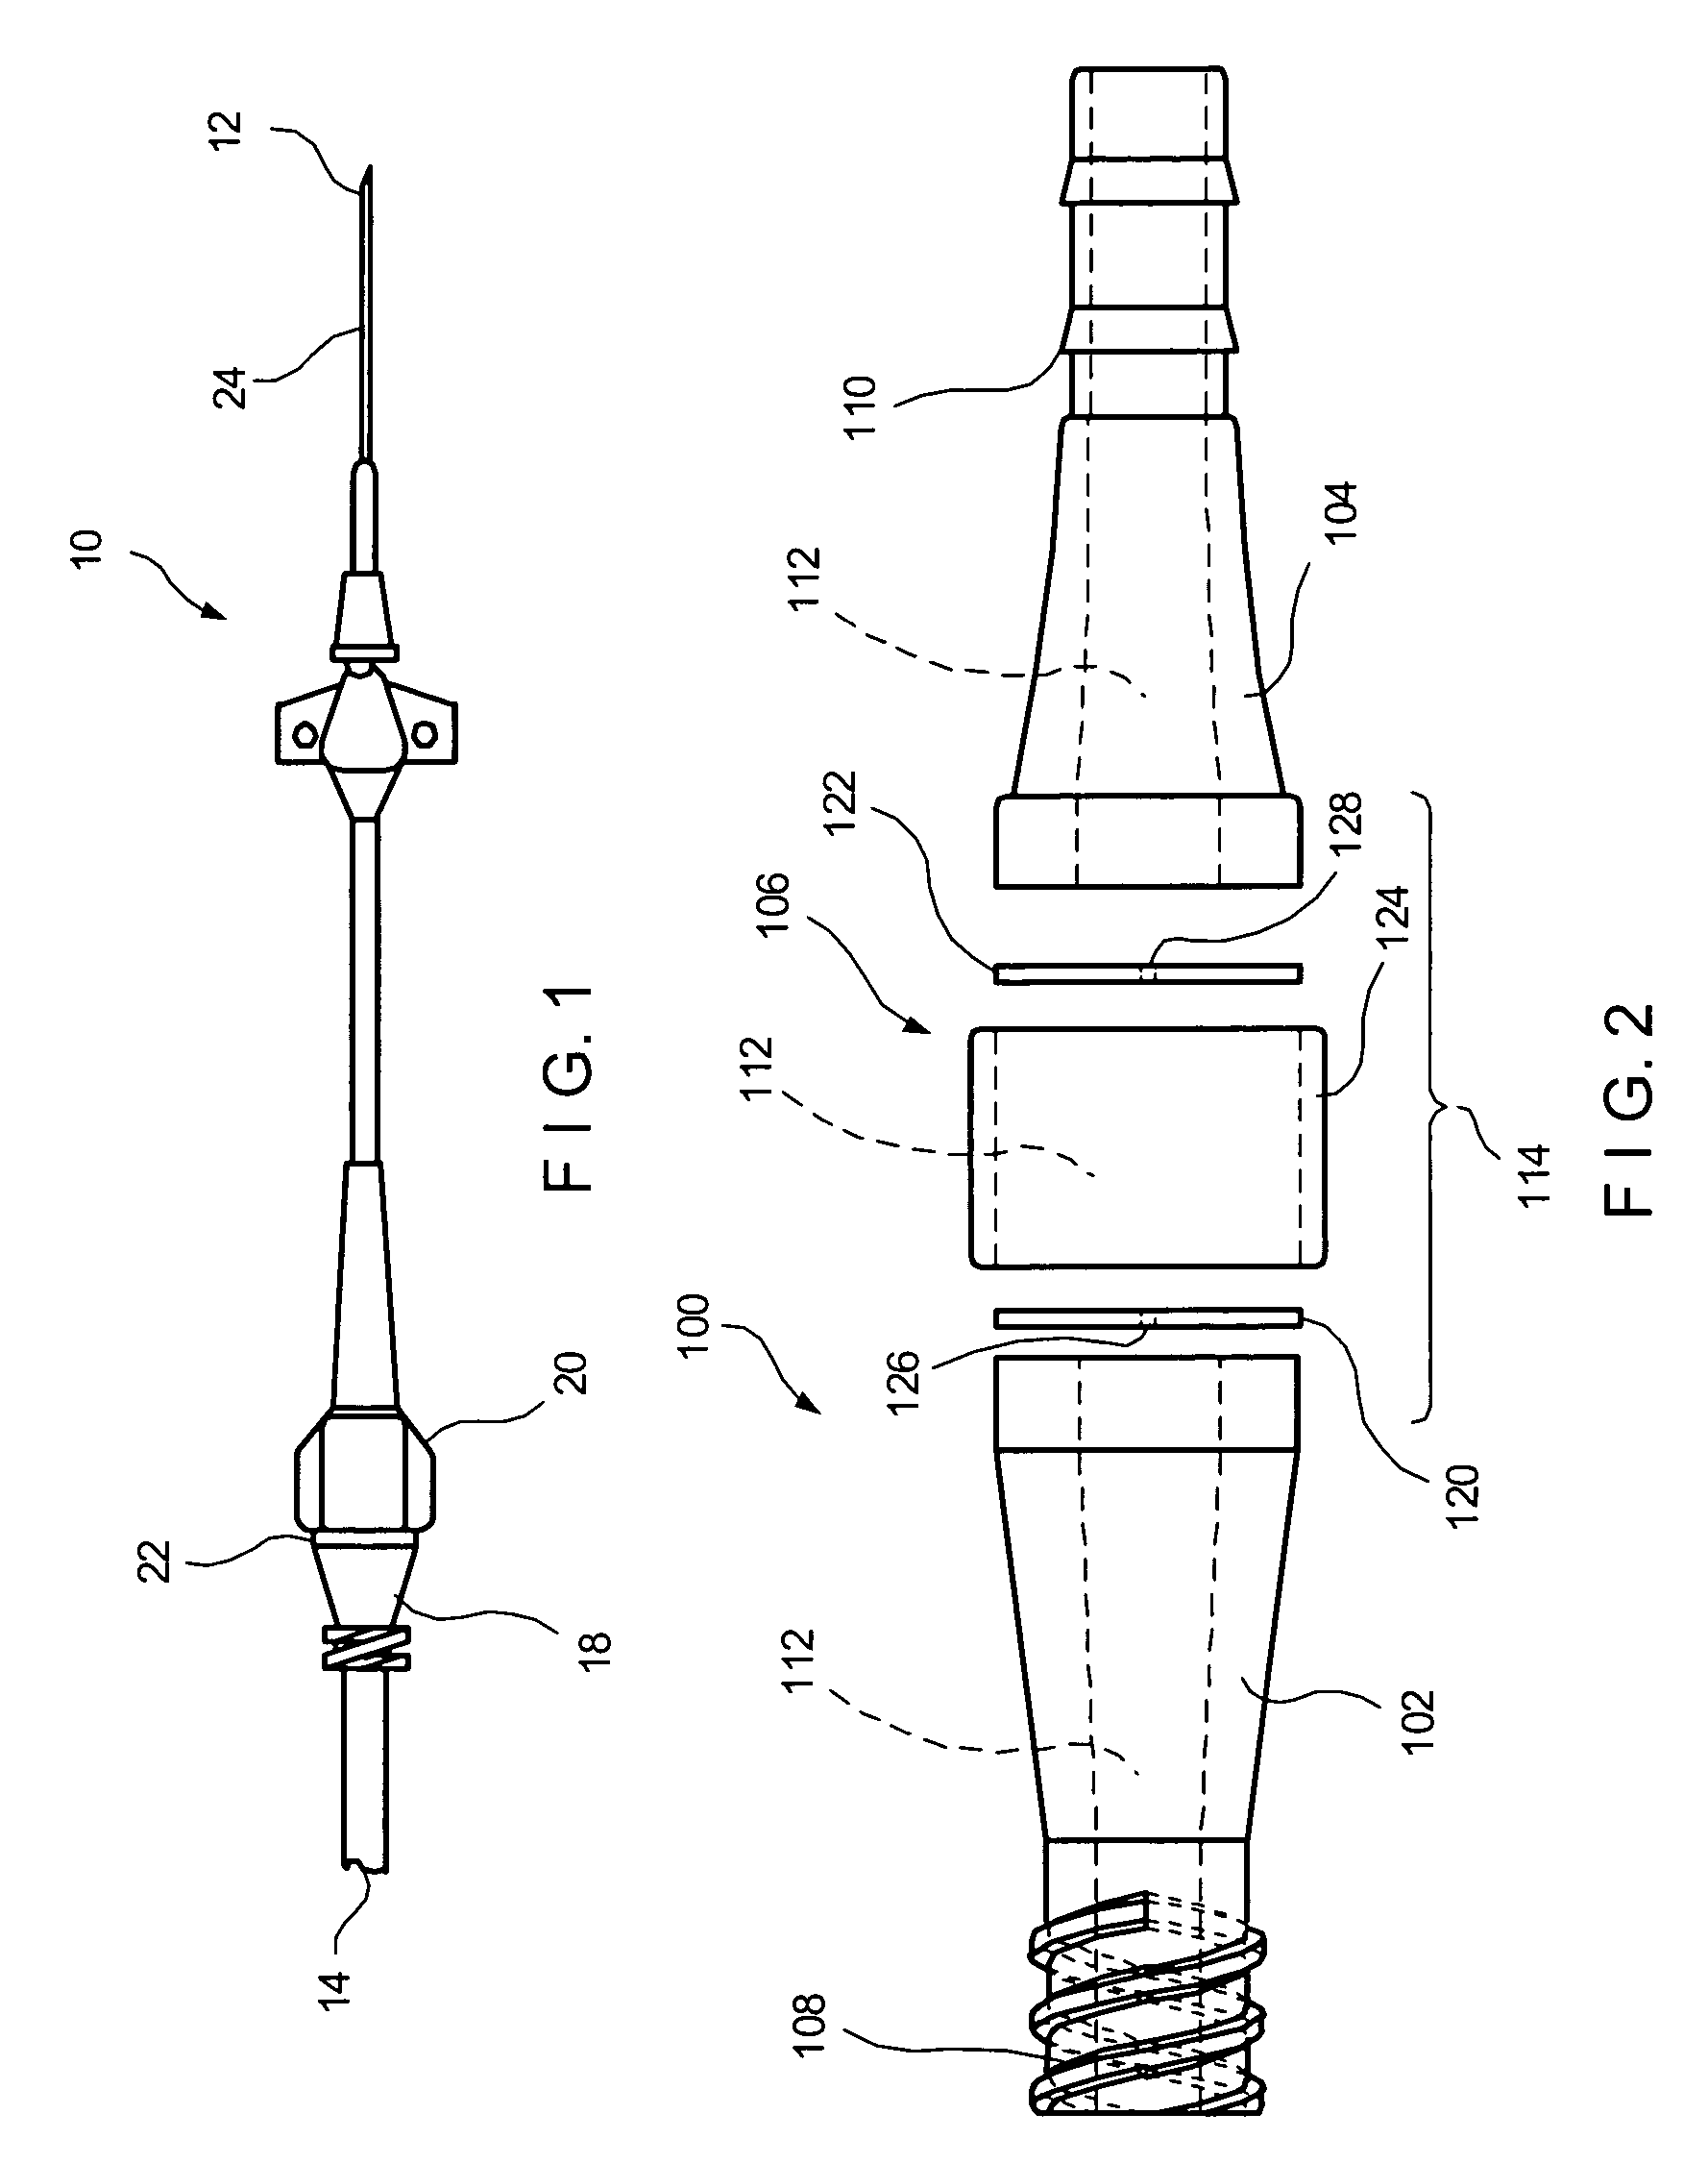 Pressure activated safety valve with improved flow characteristics and durability